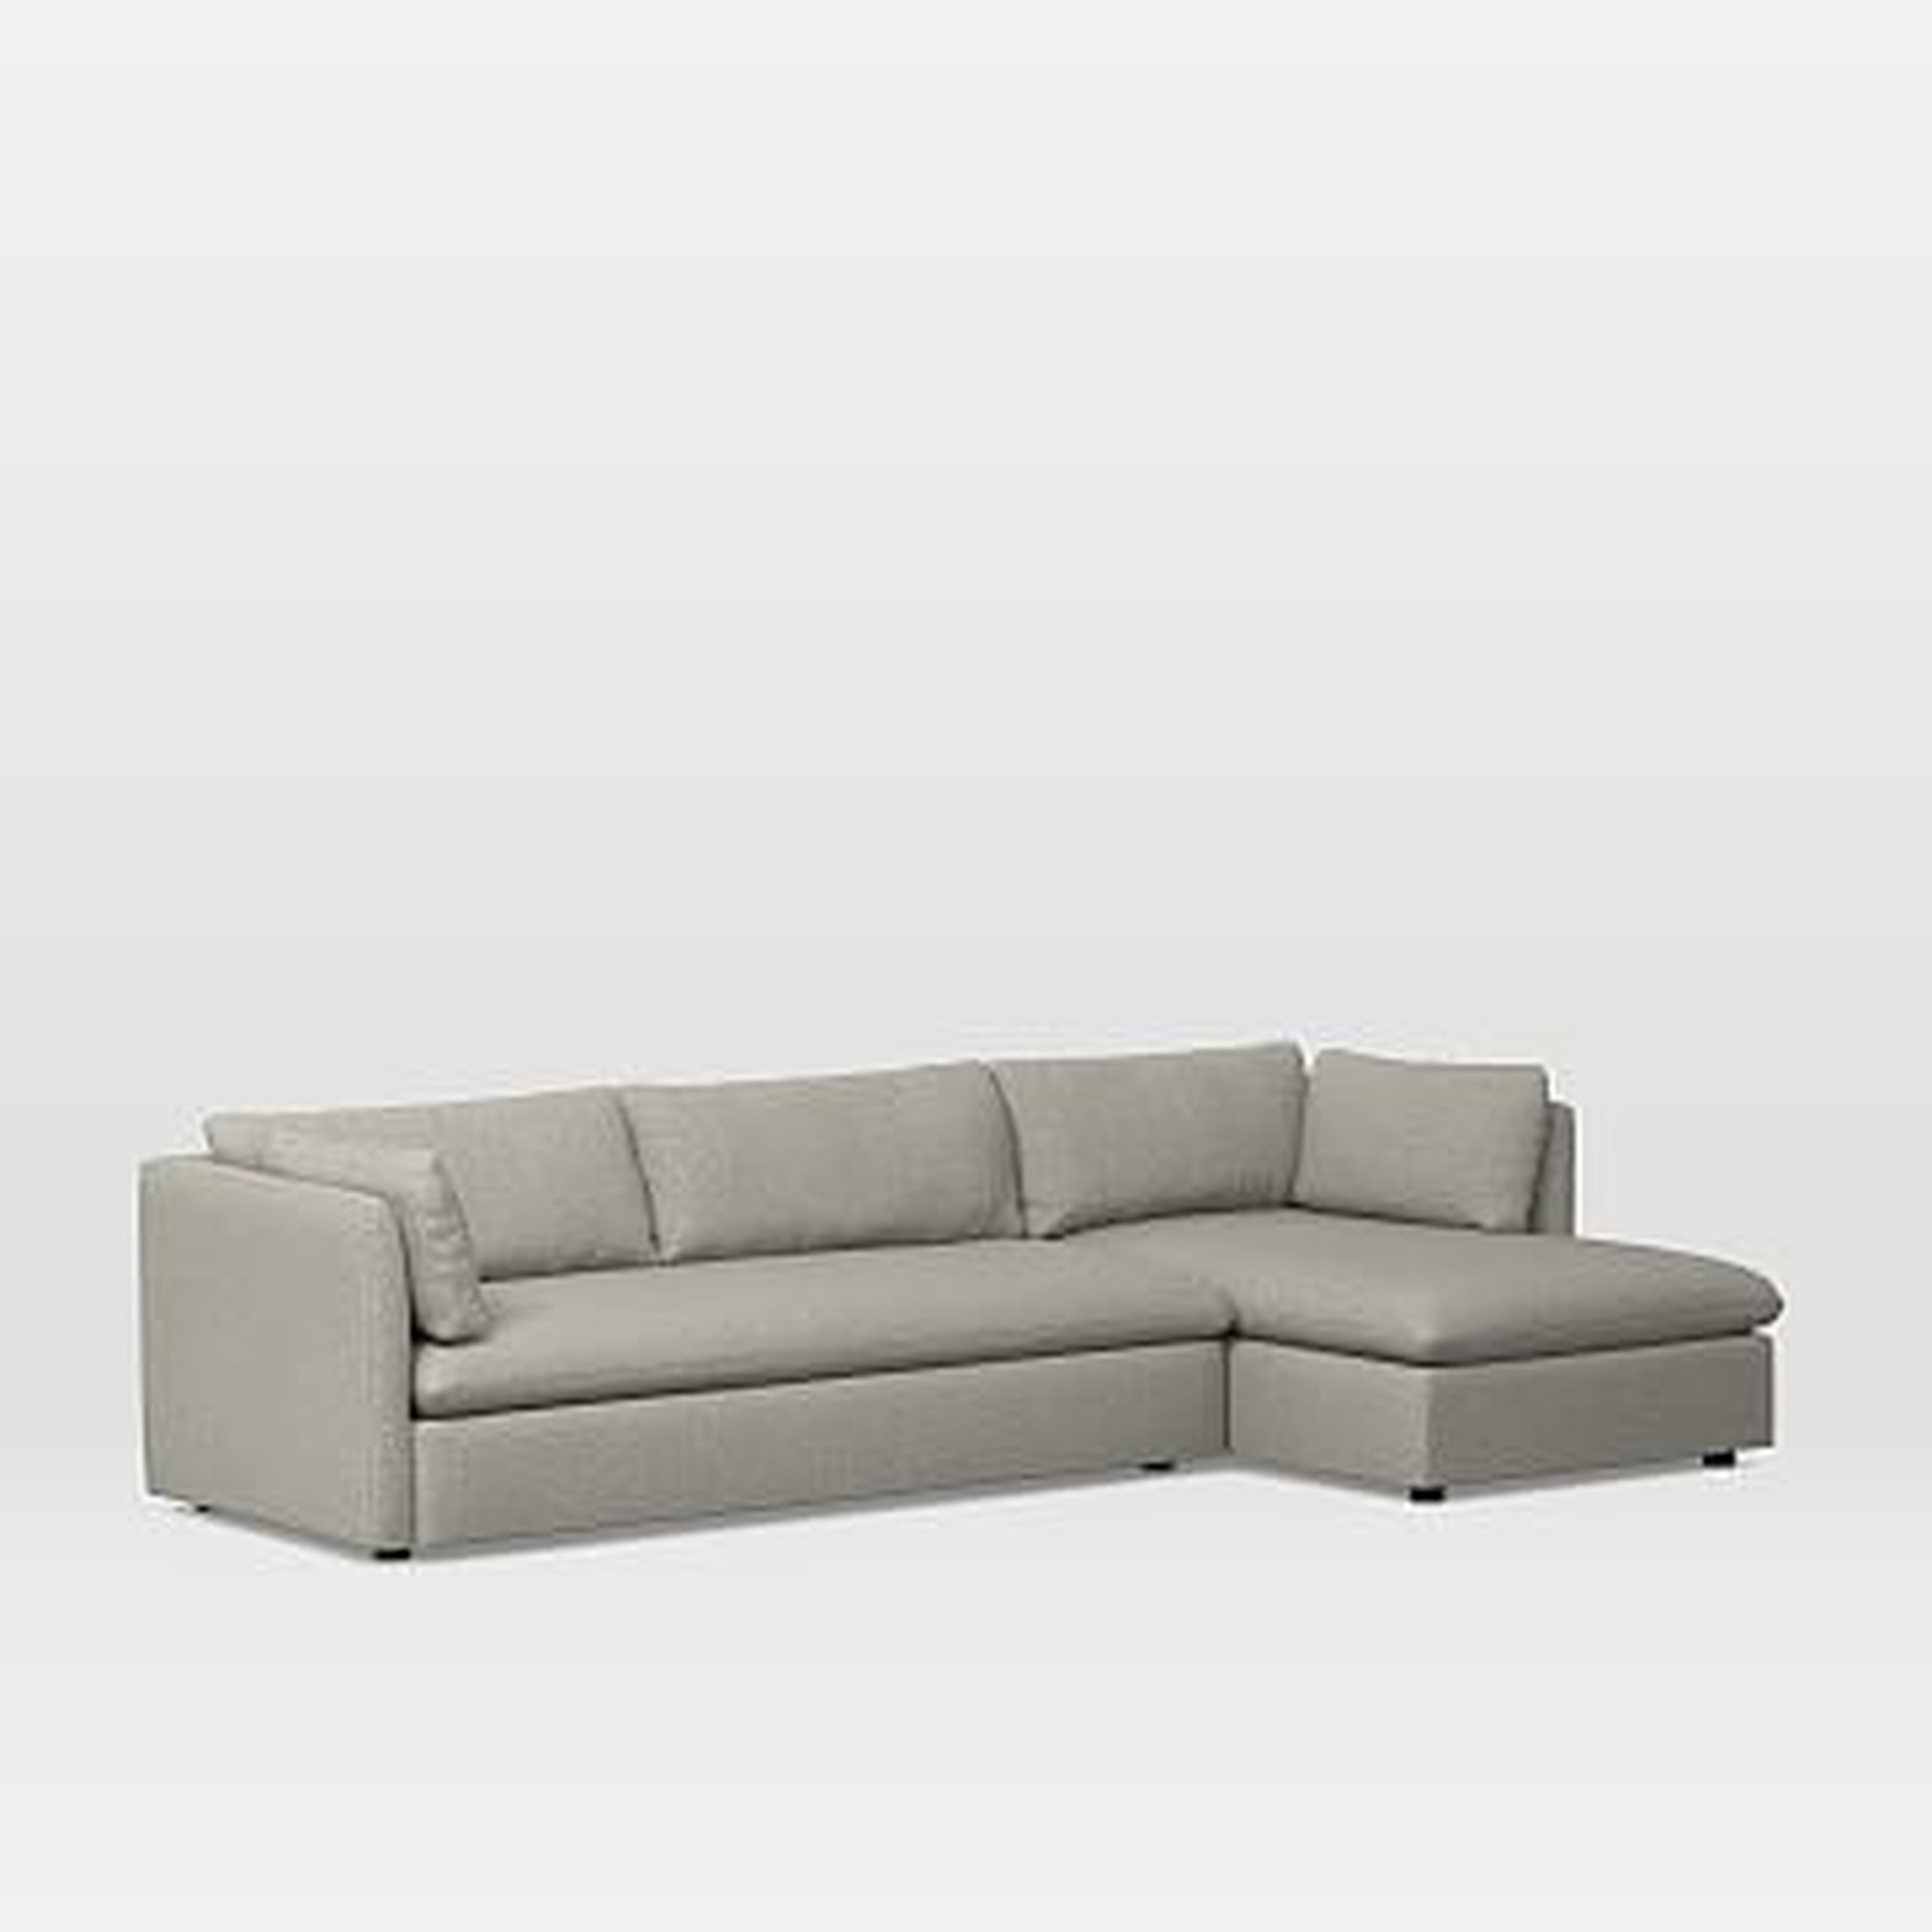 Shelter Sectional Set 06: Left Arm Sleeper Sofa, Right Arm Storage Chaise, Poly, Twill, Gravel - West Elm